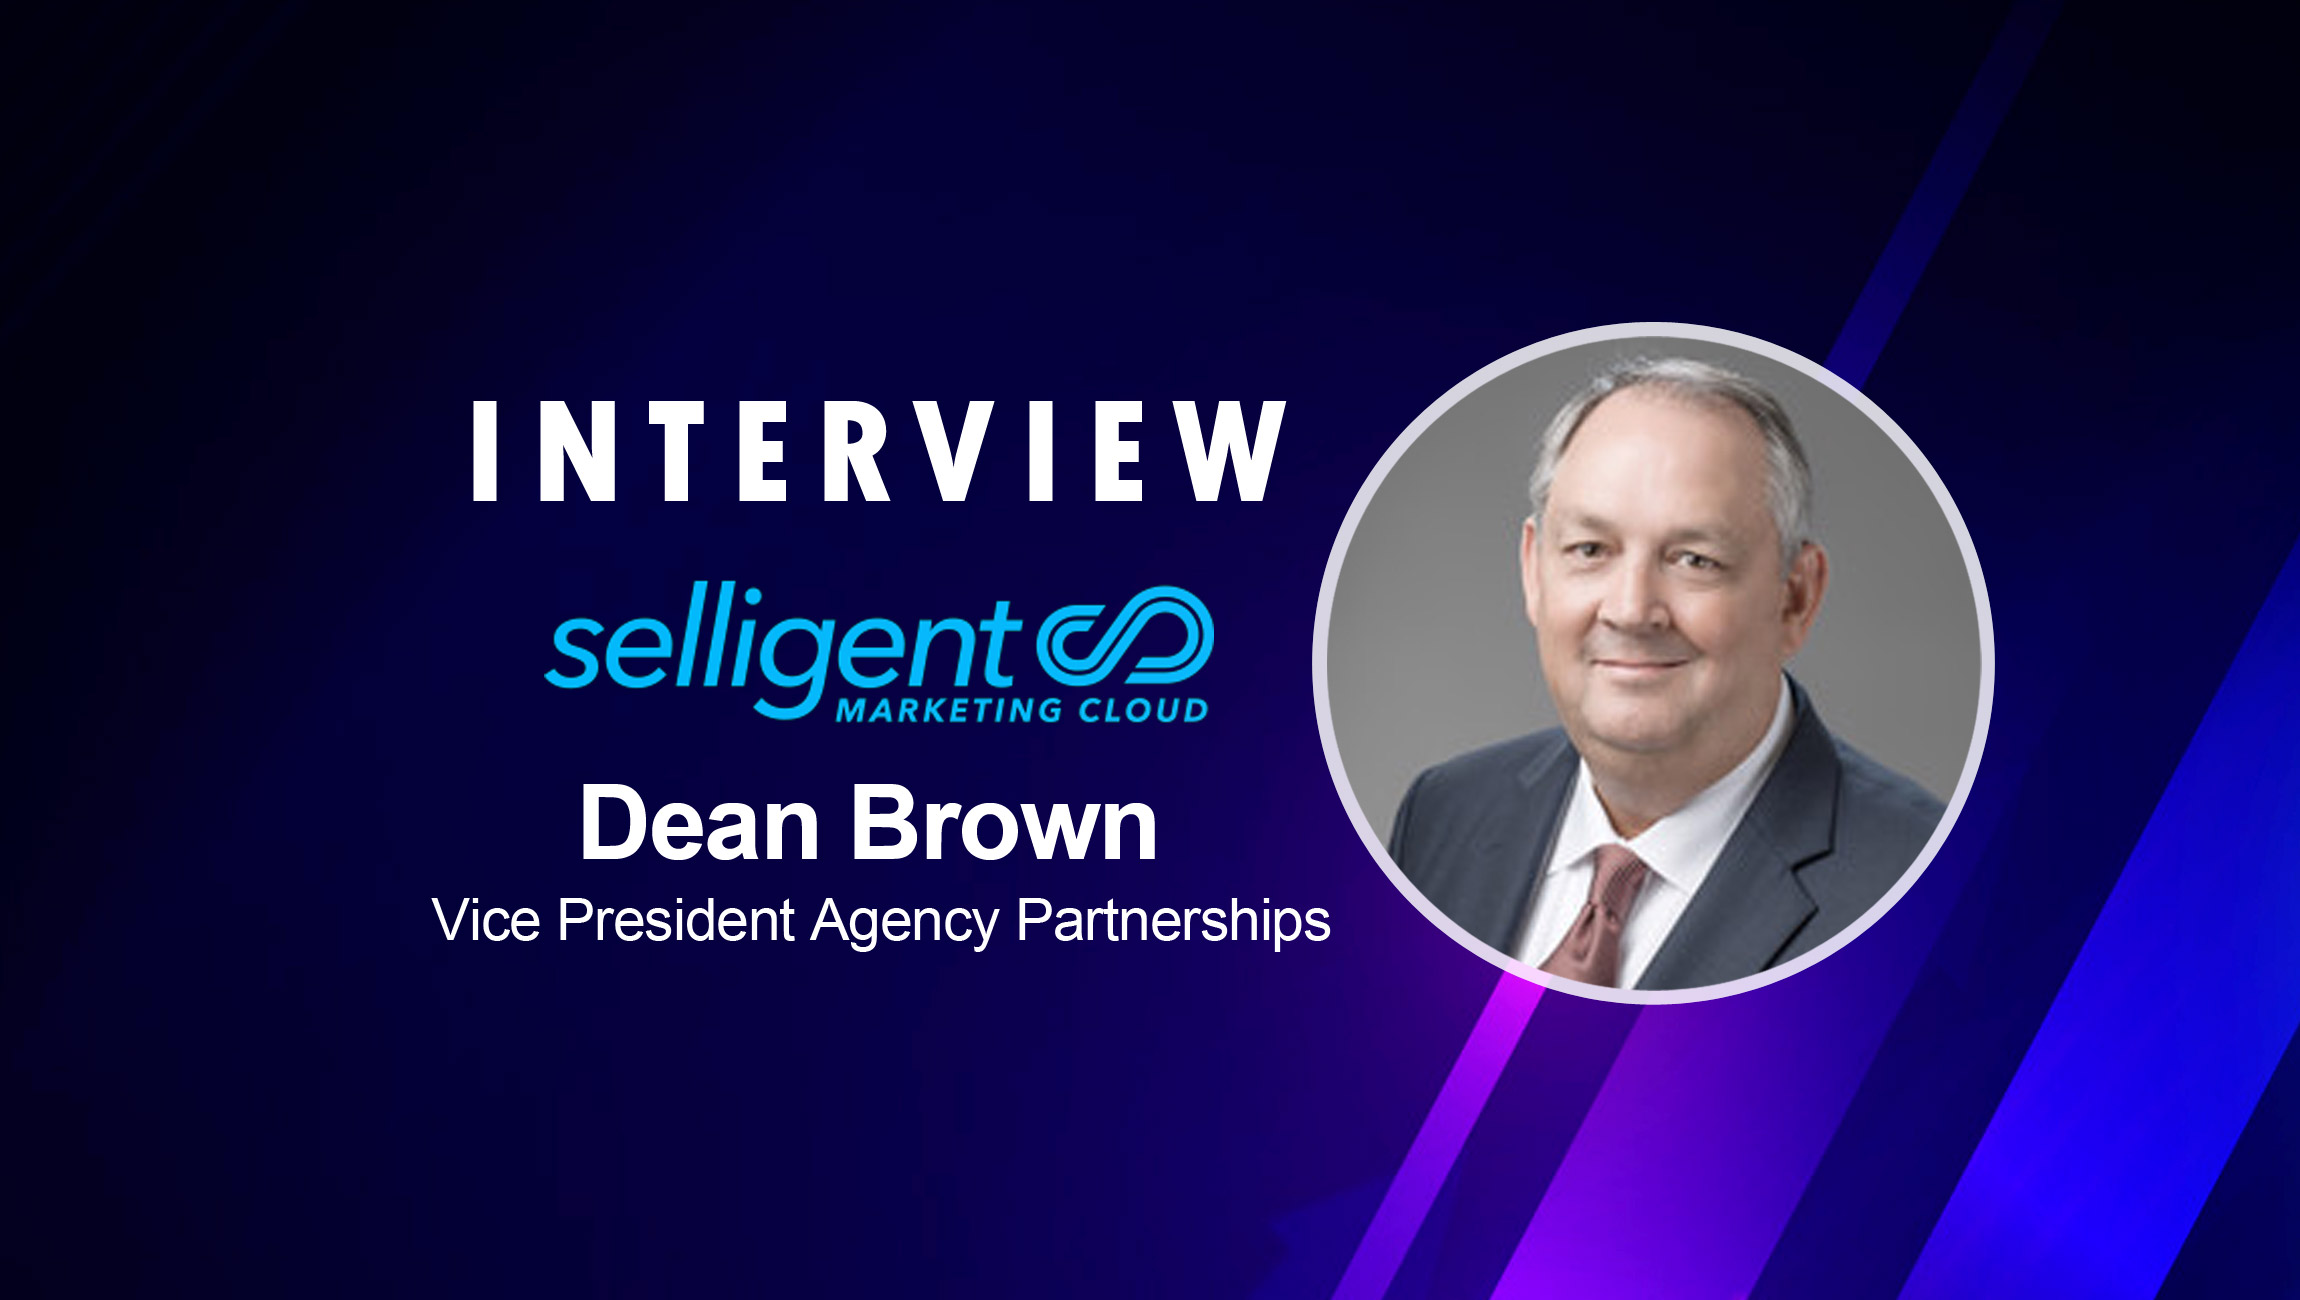 SalesTechStar Interview with Dean Brown, VP of Agency Partnerships at Selligent